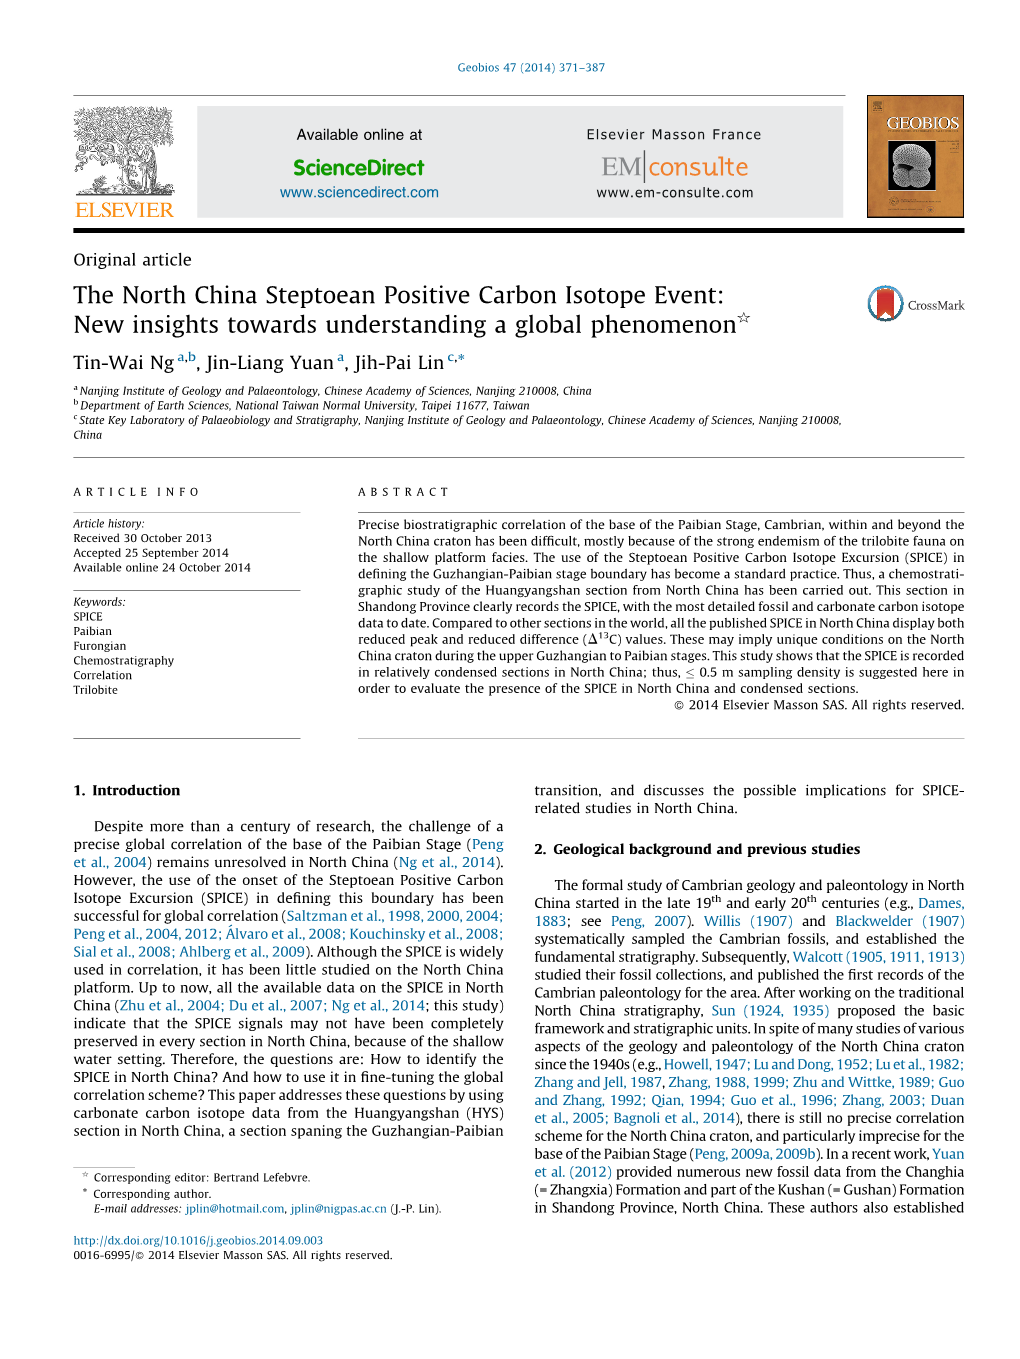 The North China Steptoean Positive Carbon Isotope Event: New Insights